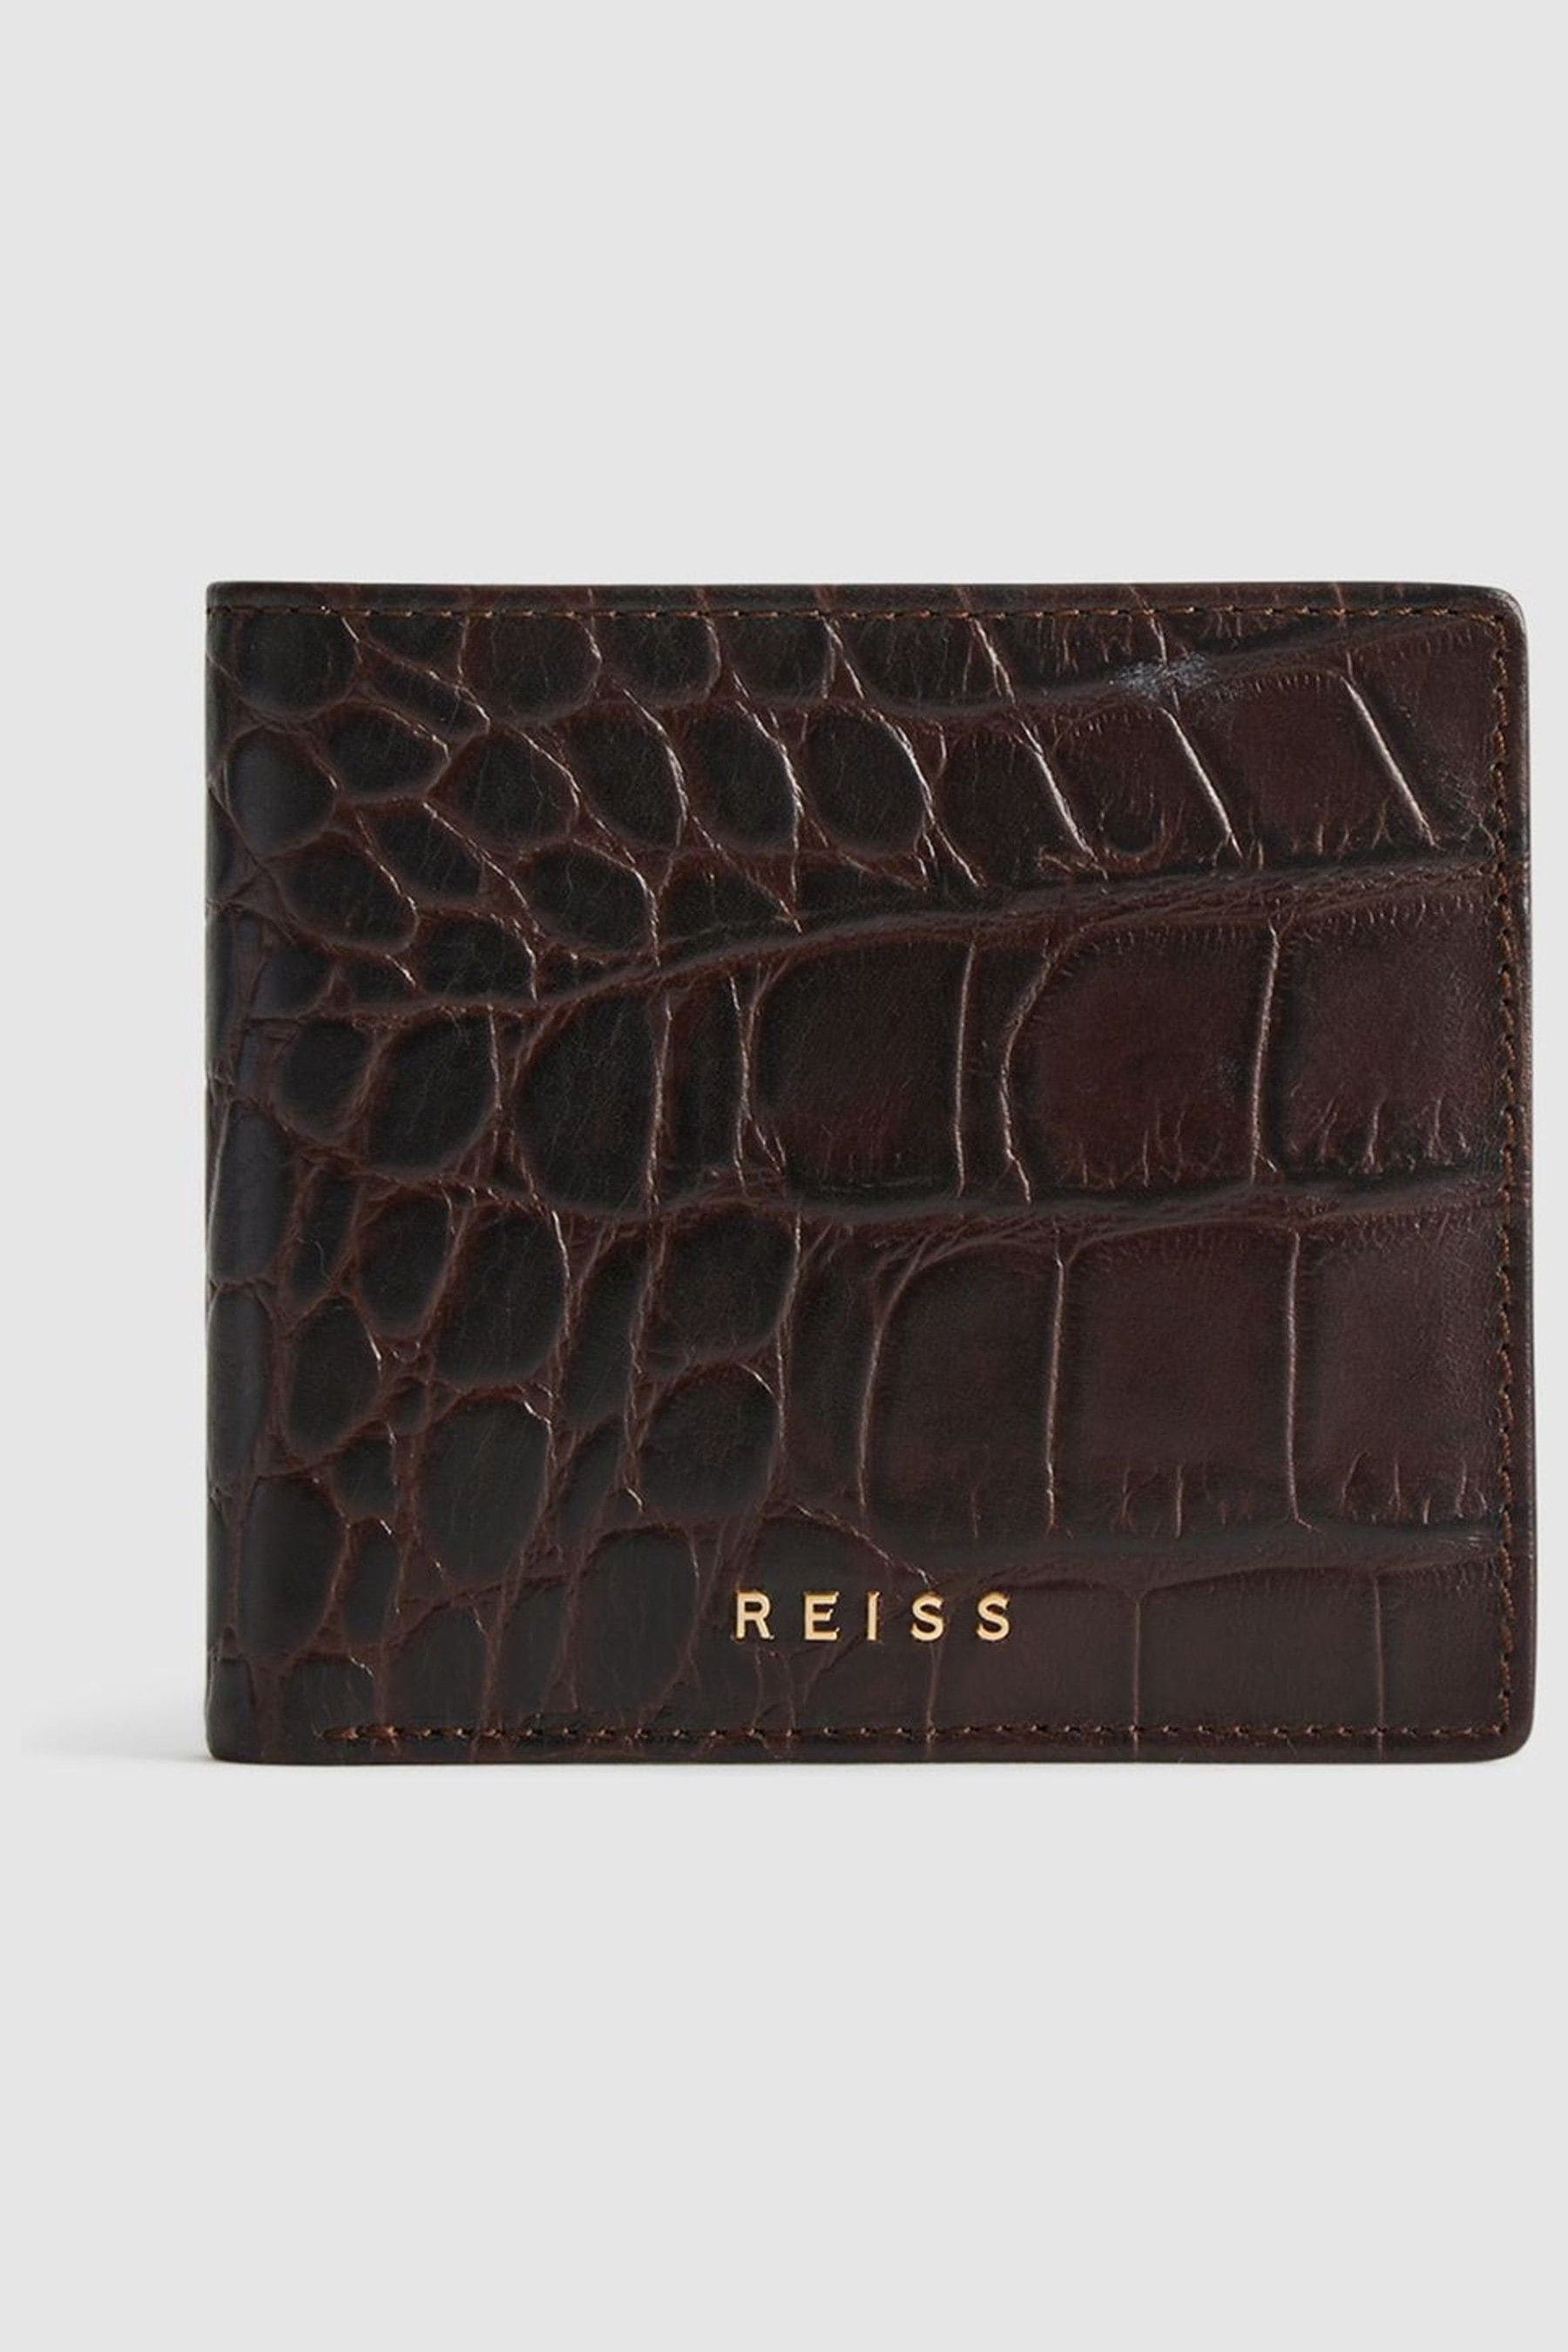 Reiss Cabot In Chocolate